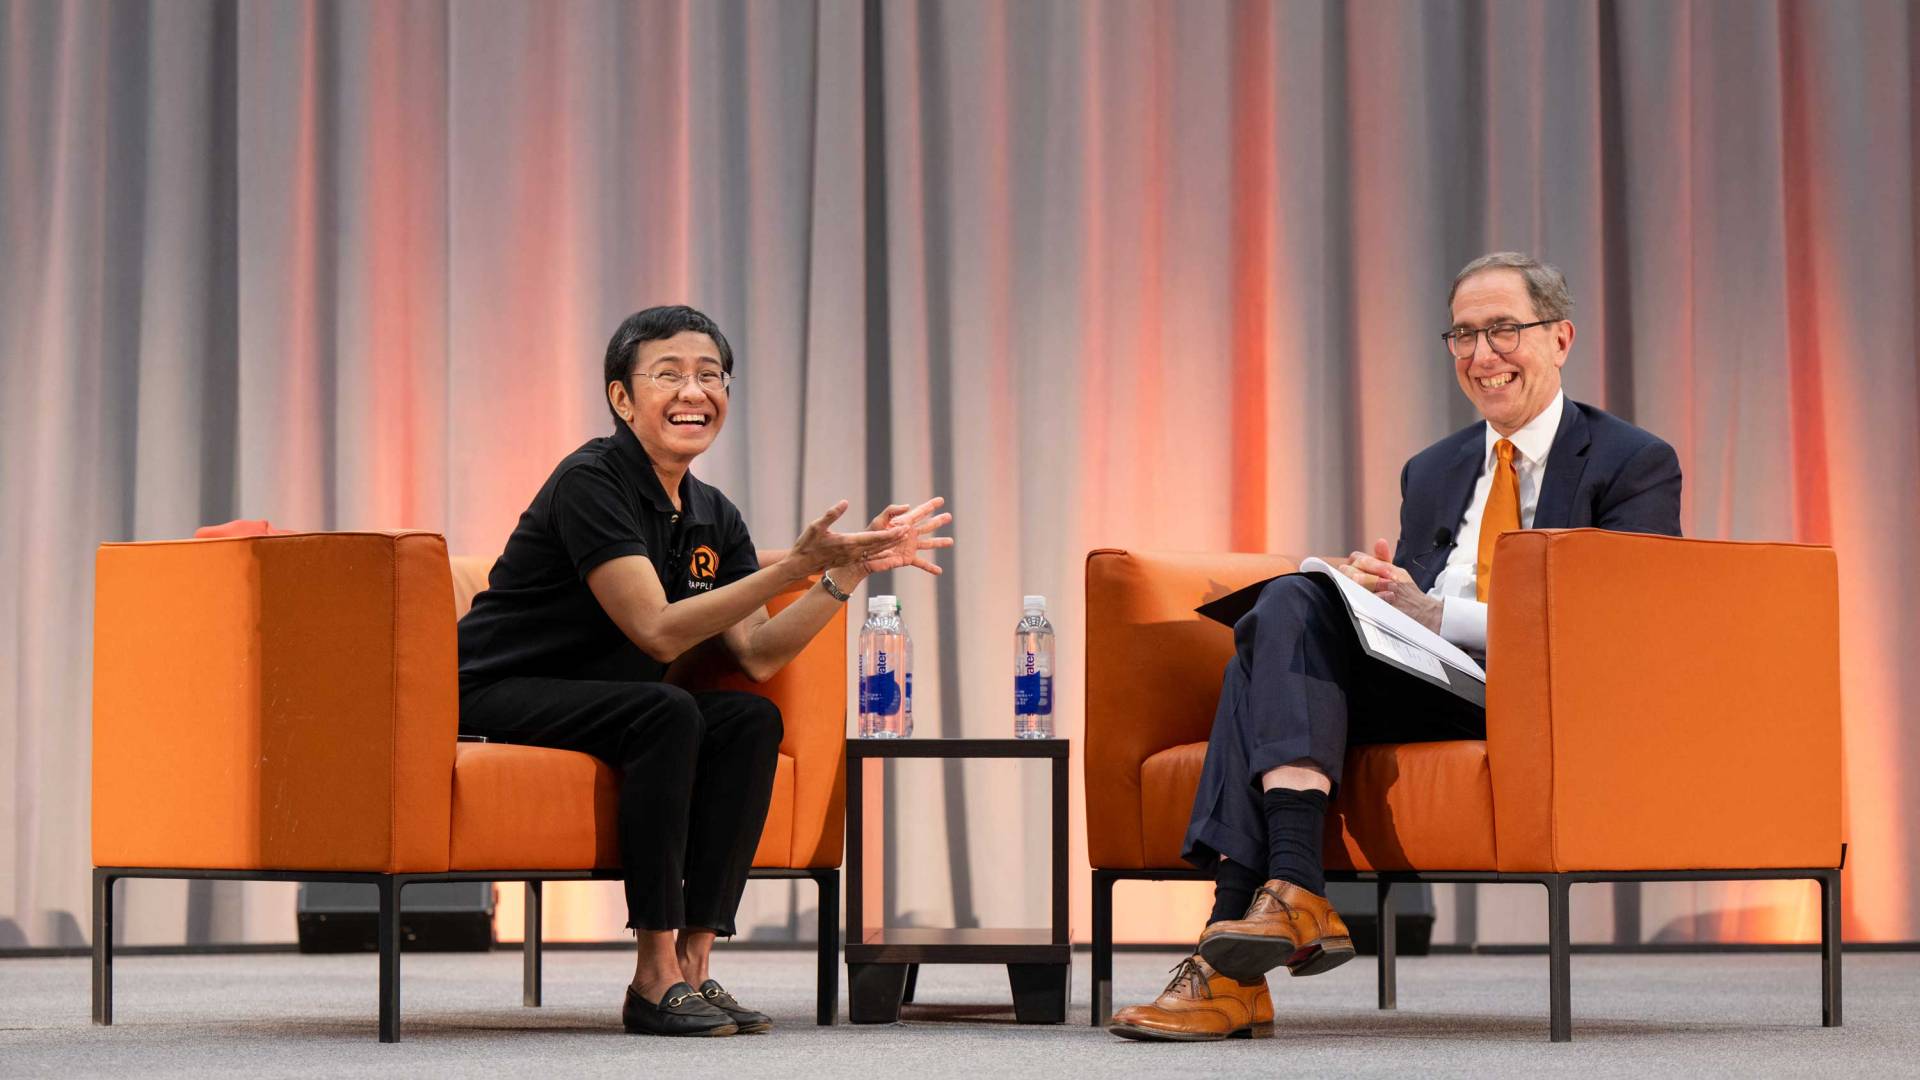 Maria Ressa and President Eisgruber share a light moment on stage